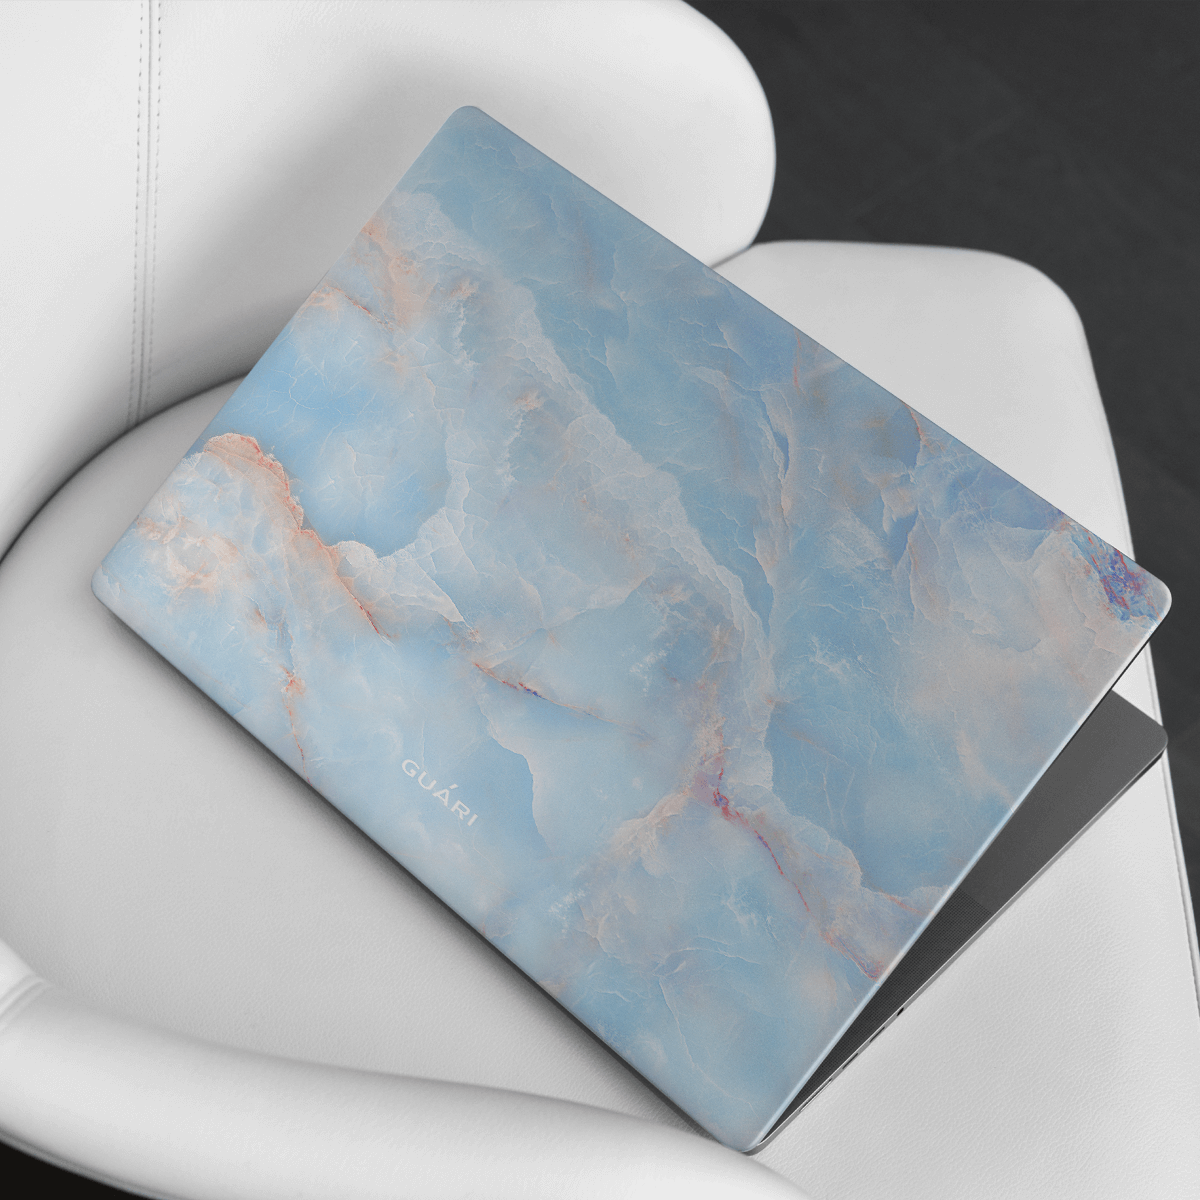 FROSTED FLAIR MACBOOK CASE